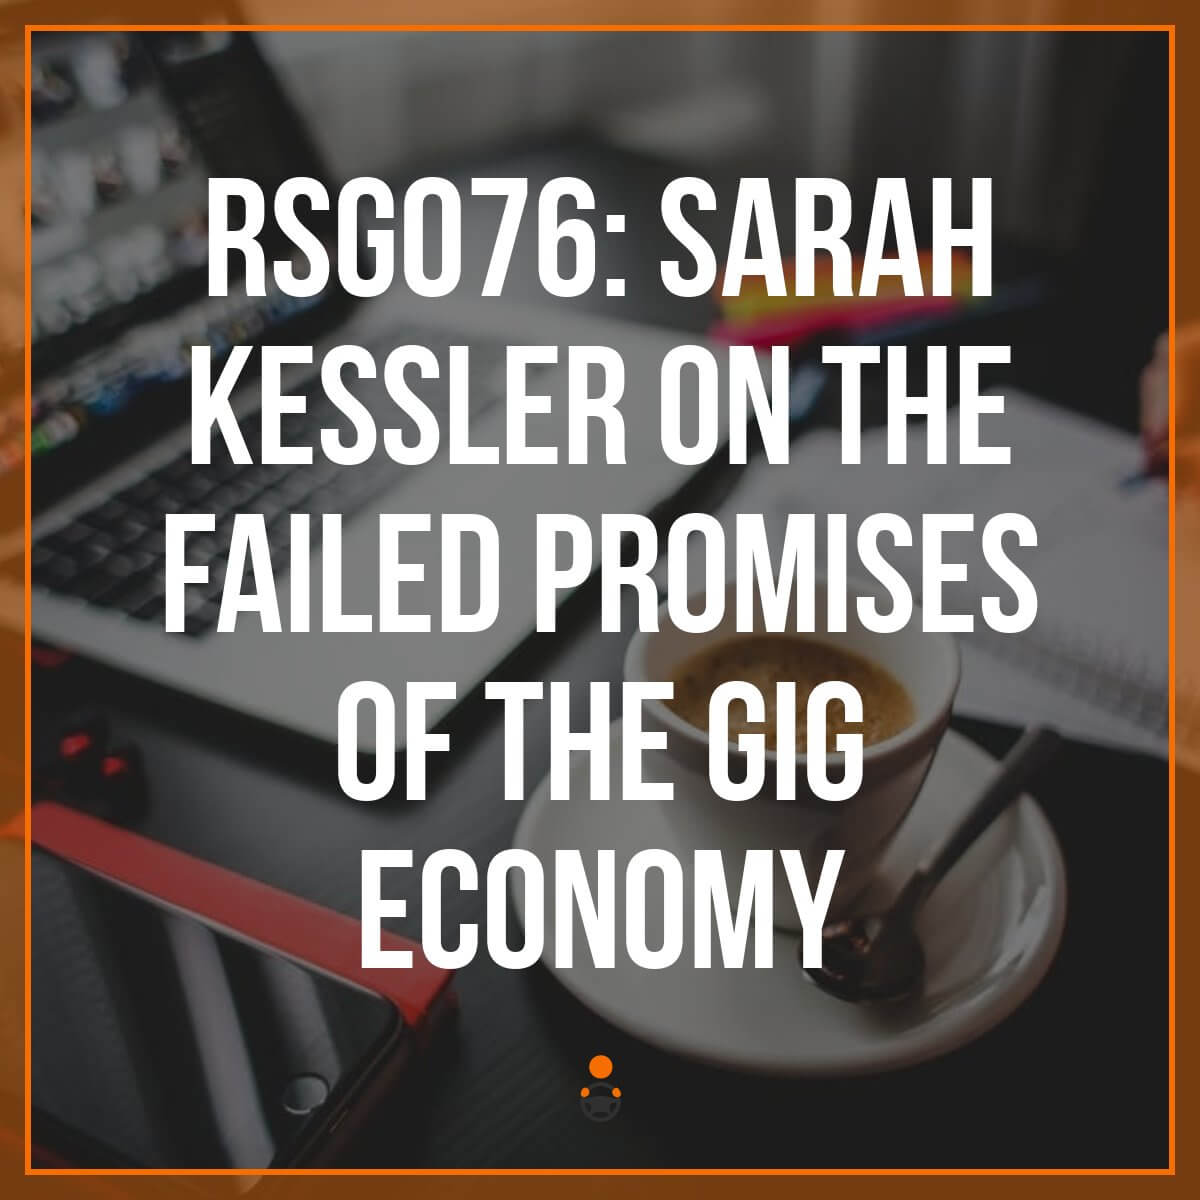 We're ten years into the "gig economy", which was initially conceived of as a way to help workers be their own bosses, work on their own schedules, and still bring in a comfortable wage. 10 years in, we can now take a good look about the benefits and downsides of the gig economy. In this episode, I speak with reporter and author Sarah Kessler about the gig economy and her new book, Gigged: The End of the Job and the Future of Work.